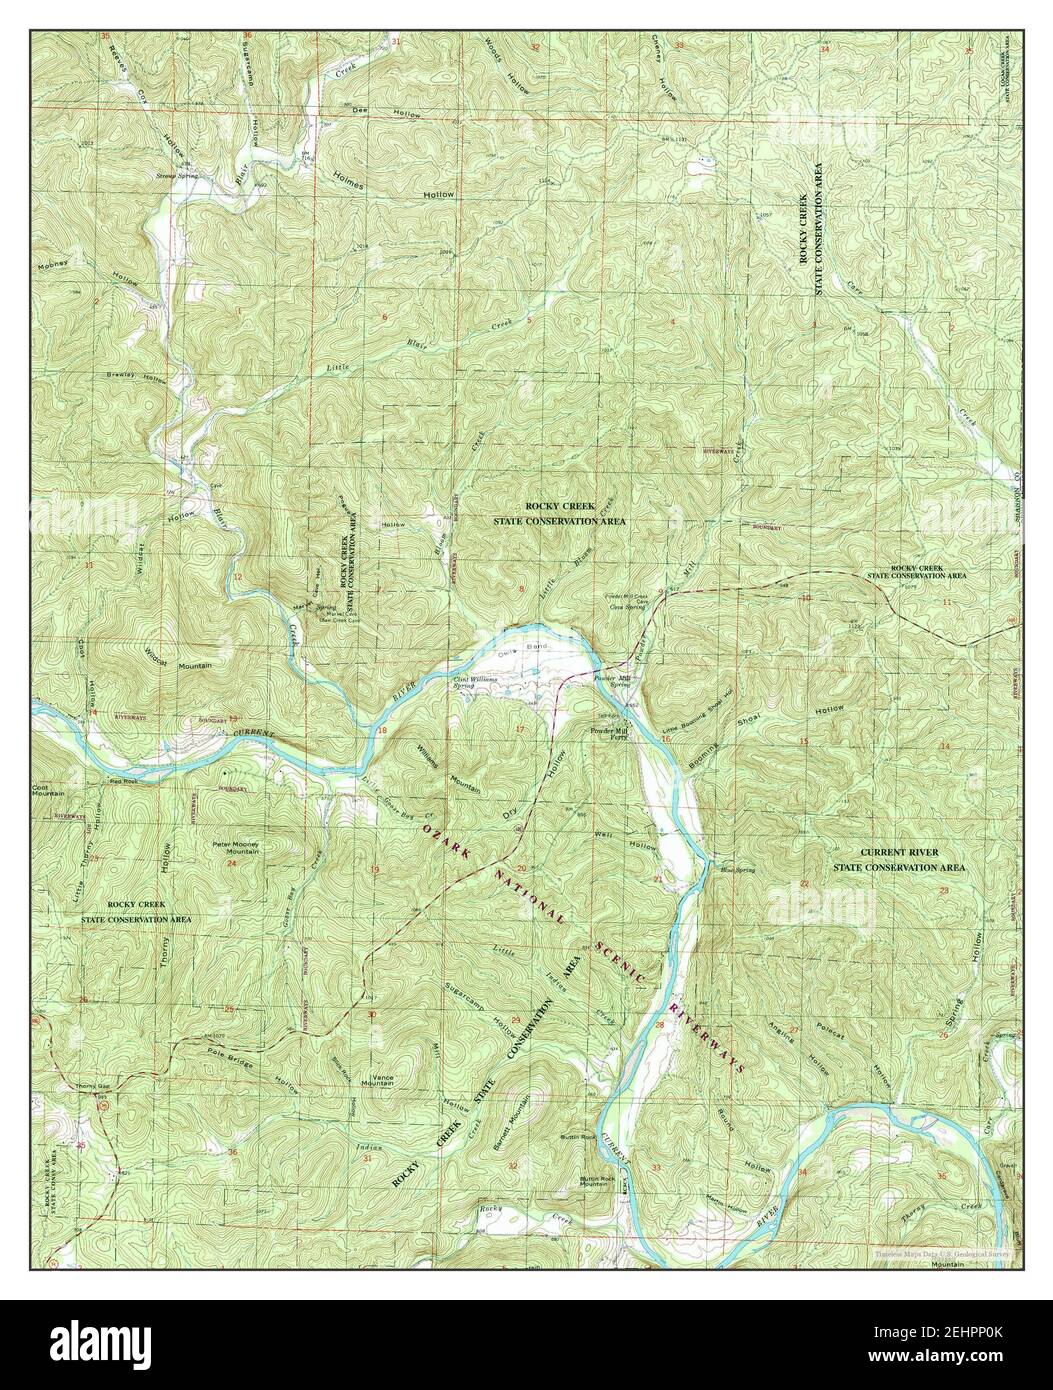 Powder Mill Ferry, Missouri, map 1997, 1:24000, United States of America by Timeless Maps, data U.S. Geological Survey Stock Photo